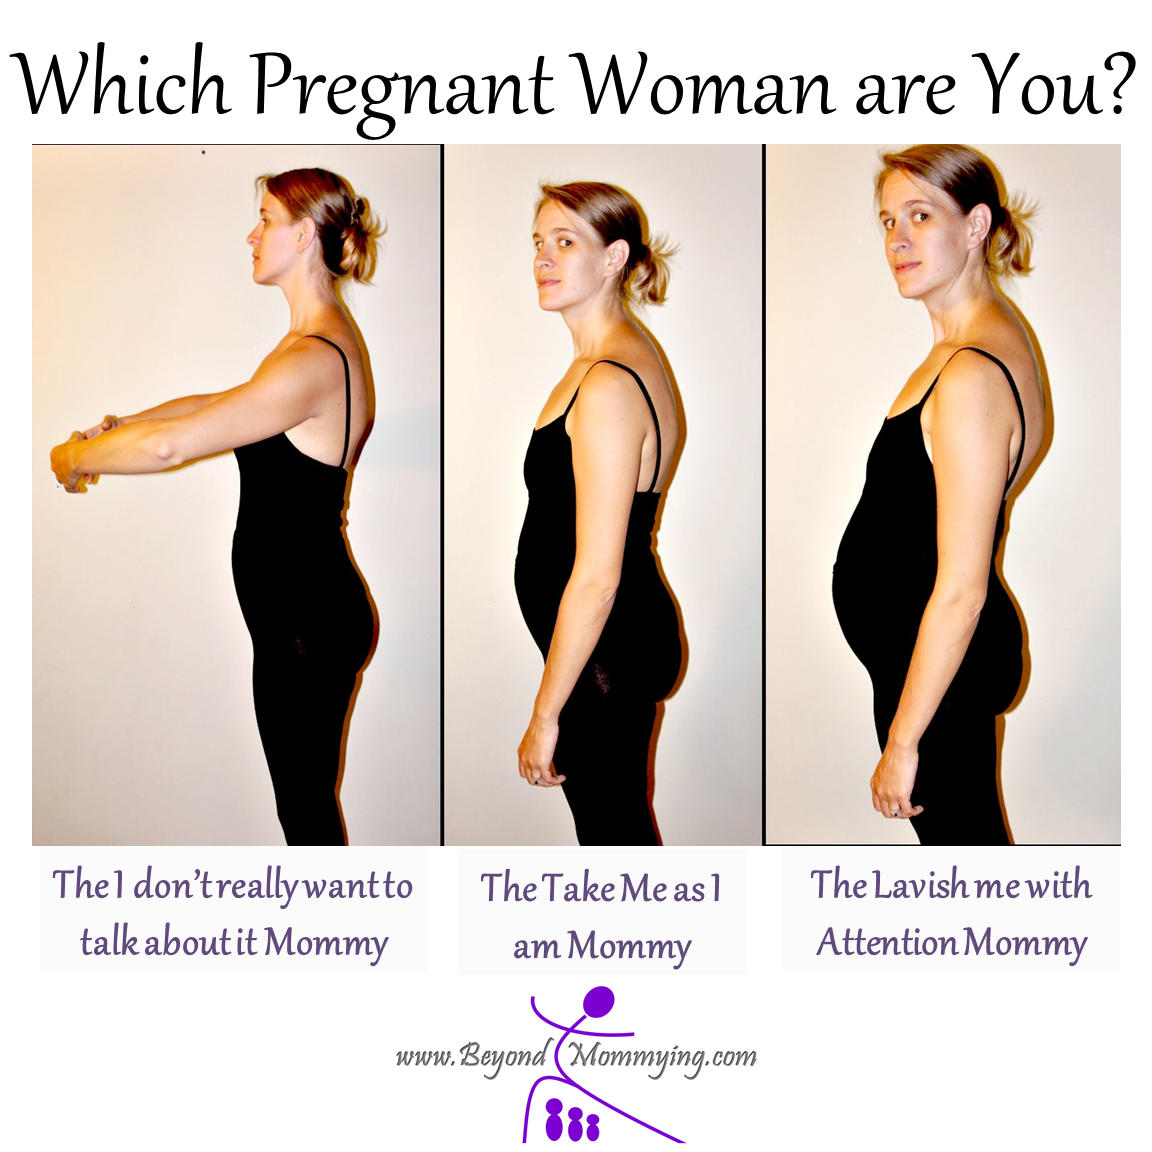 How To Avoid Buying Maternity Clothes - You Don't Need Them! - The